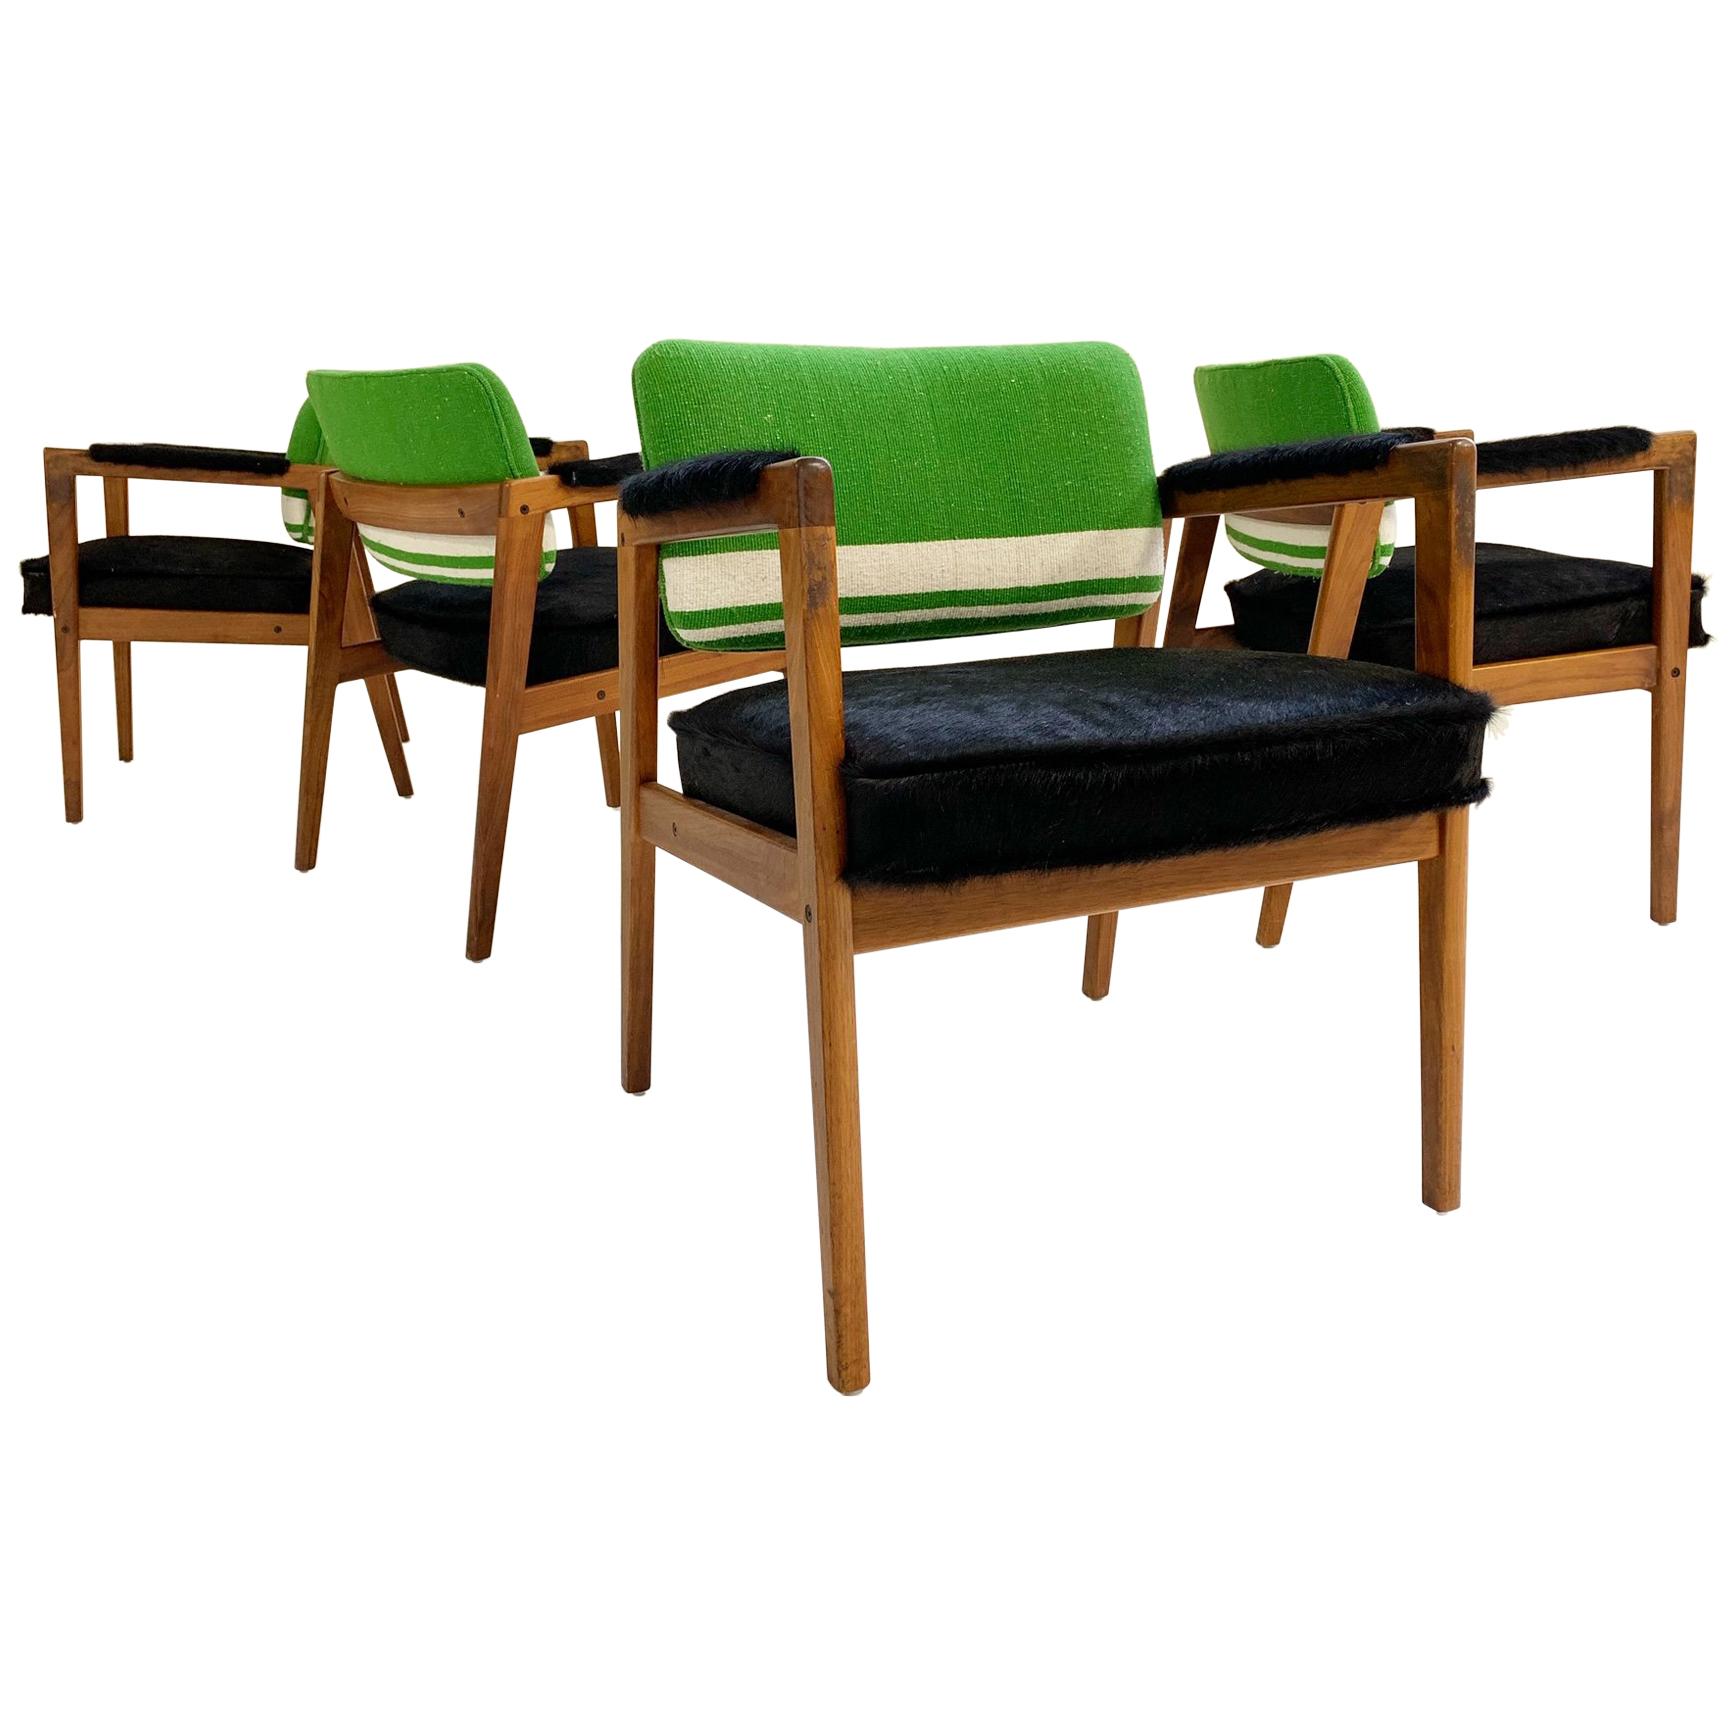 Midcentury Swedish Chairs in Brazilian Cowhide and Isabel Marant Silk Wool